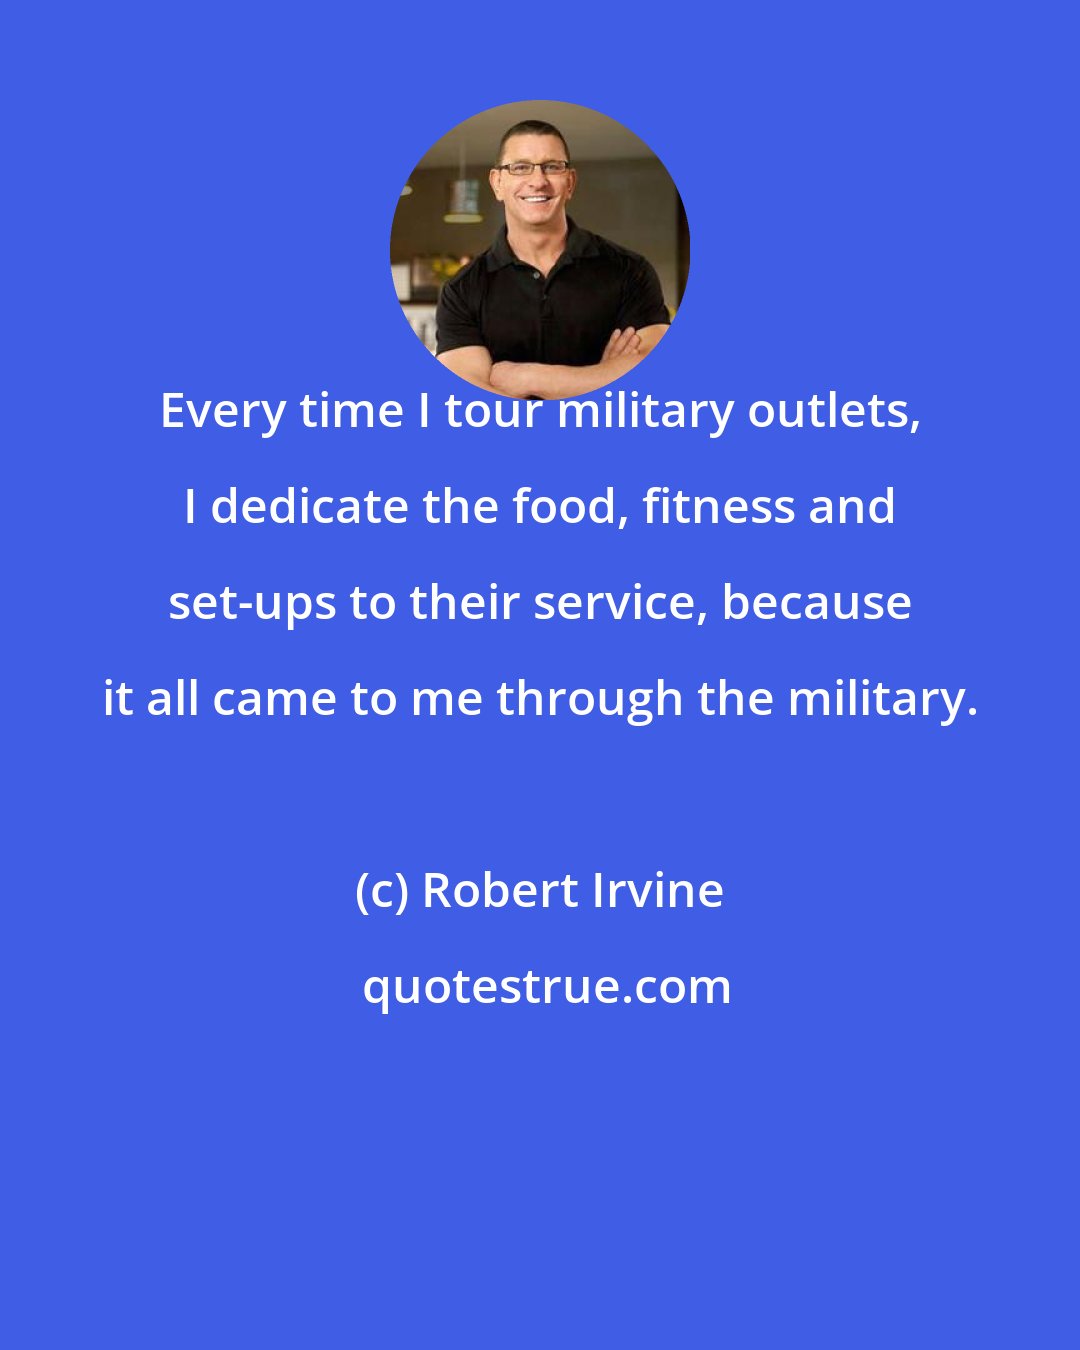 Robert Irvine: Every time I tour military outlets, I dedicate the food, fitness and set-ups to their service, because it all came to me through the military.